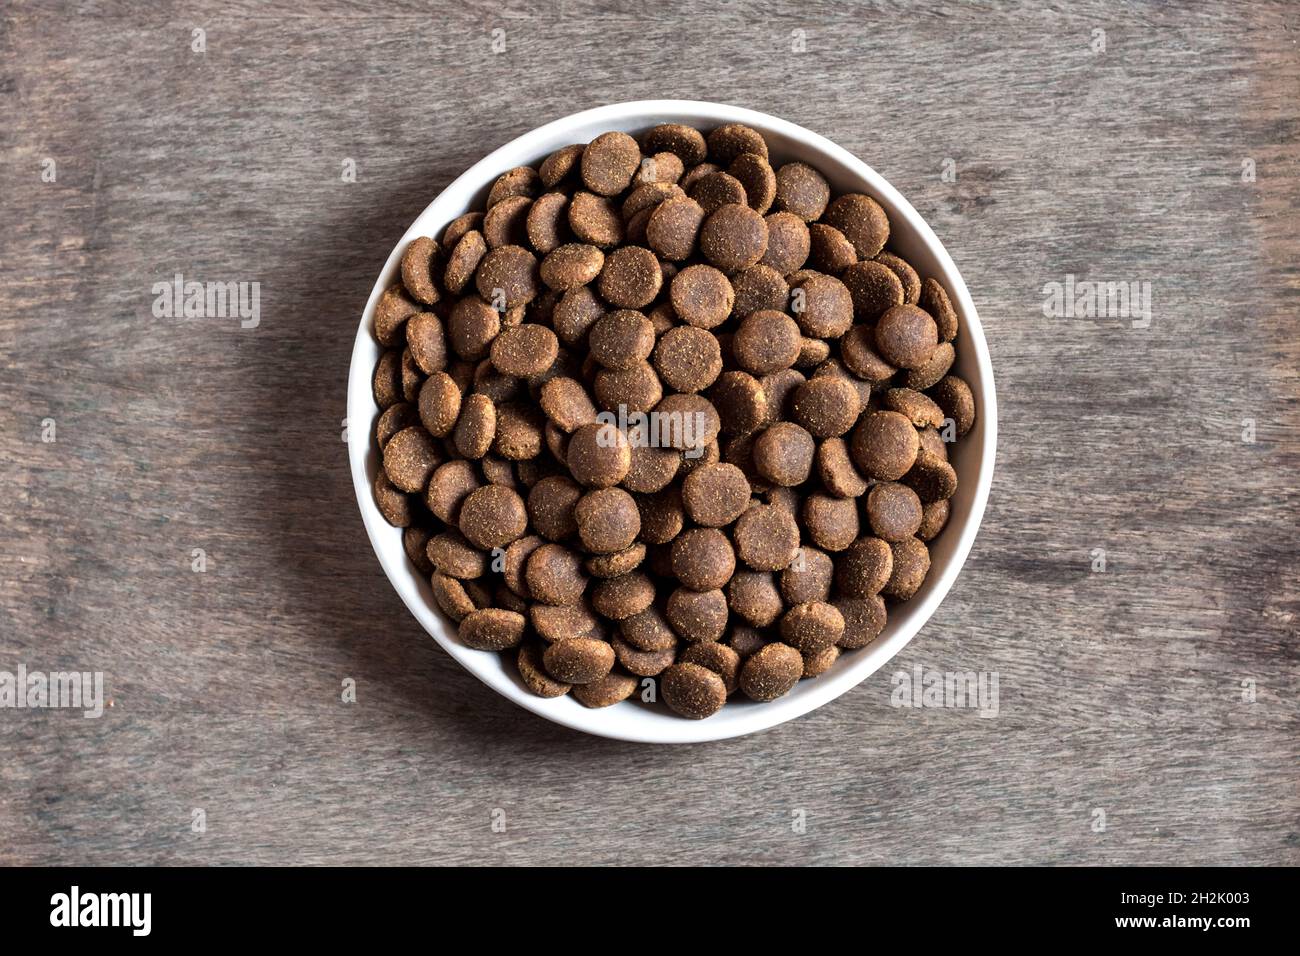 Dry pet food in a white ceramic bowl on wooden background. Flat lay, top view, copy space Stock Photo